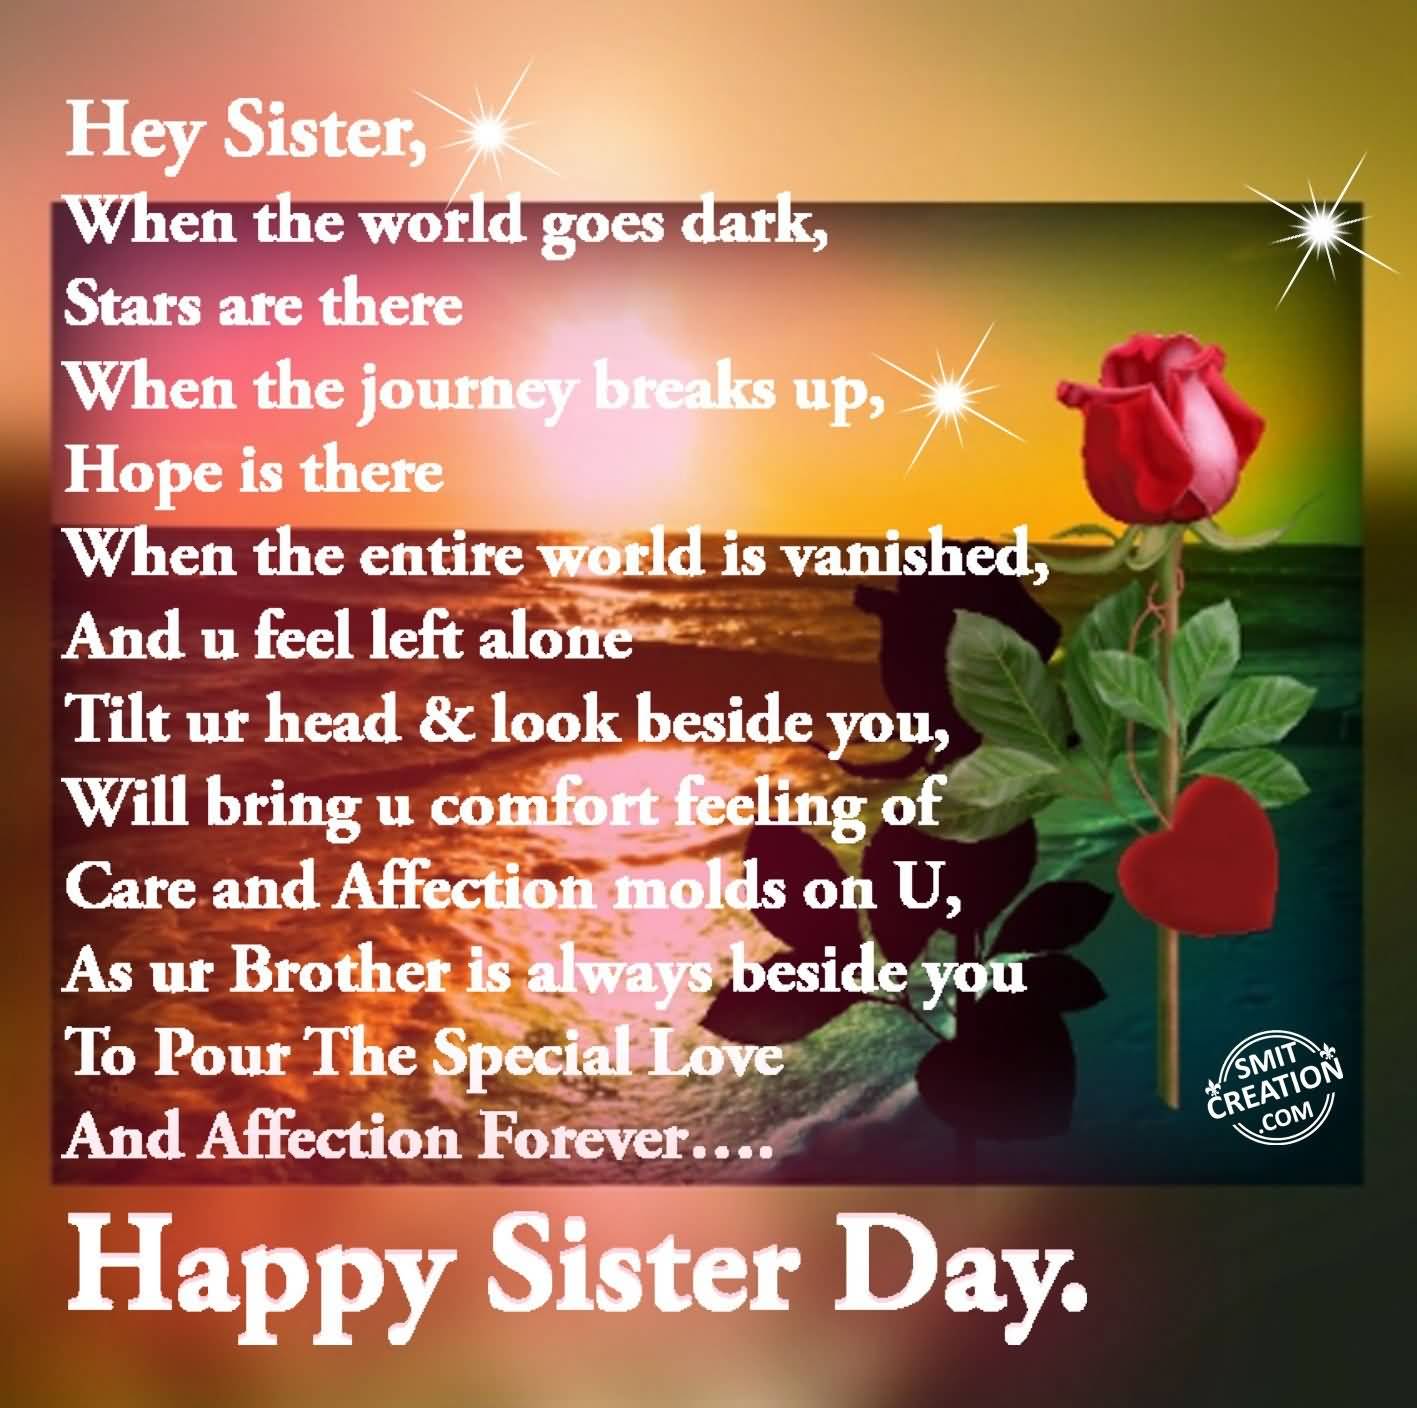 Hey sister. The best sister in the World is. Hey sister go sister. Happy Birthday sister.